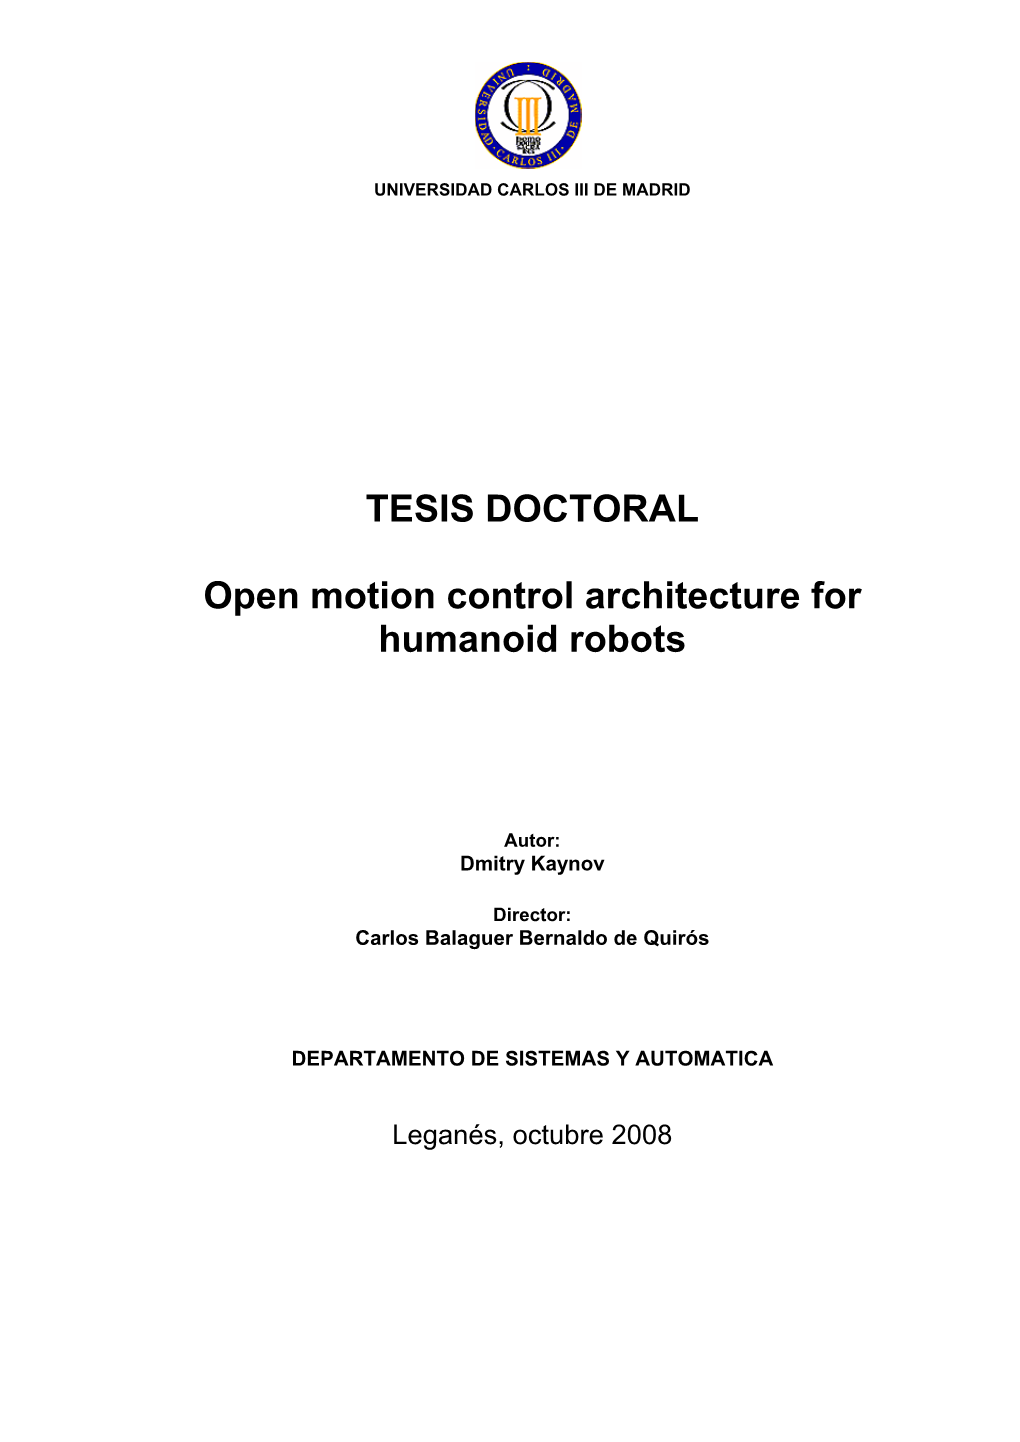 TESIS DOCTORAL Open Motion Control Architecture For